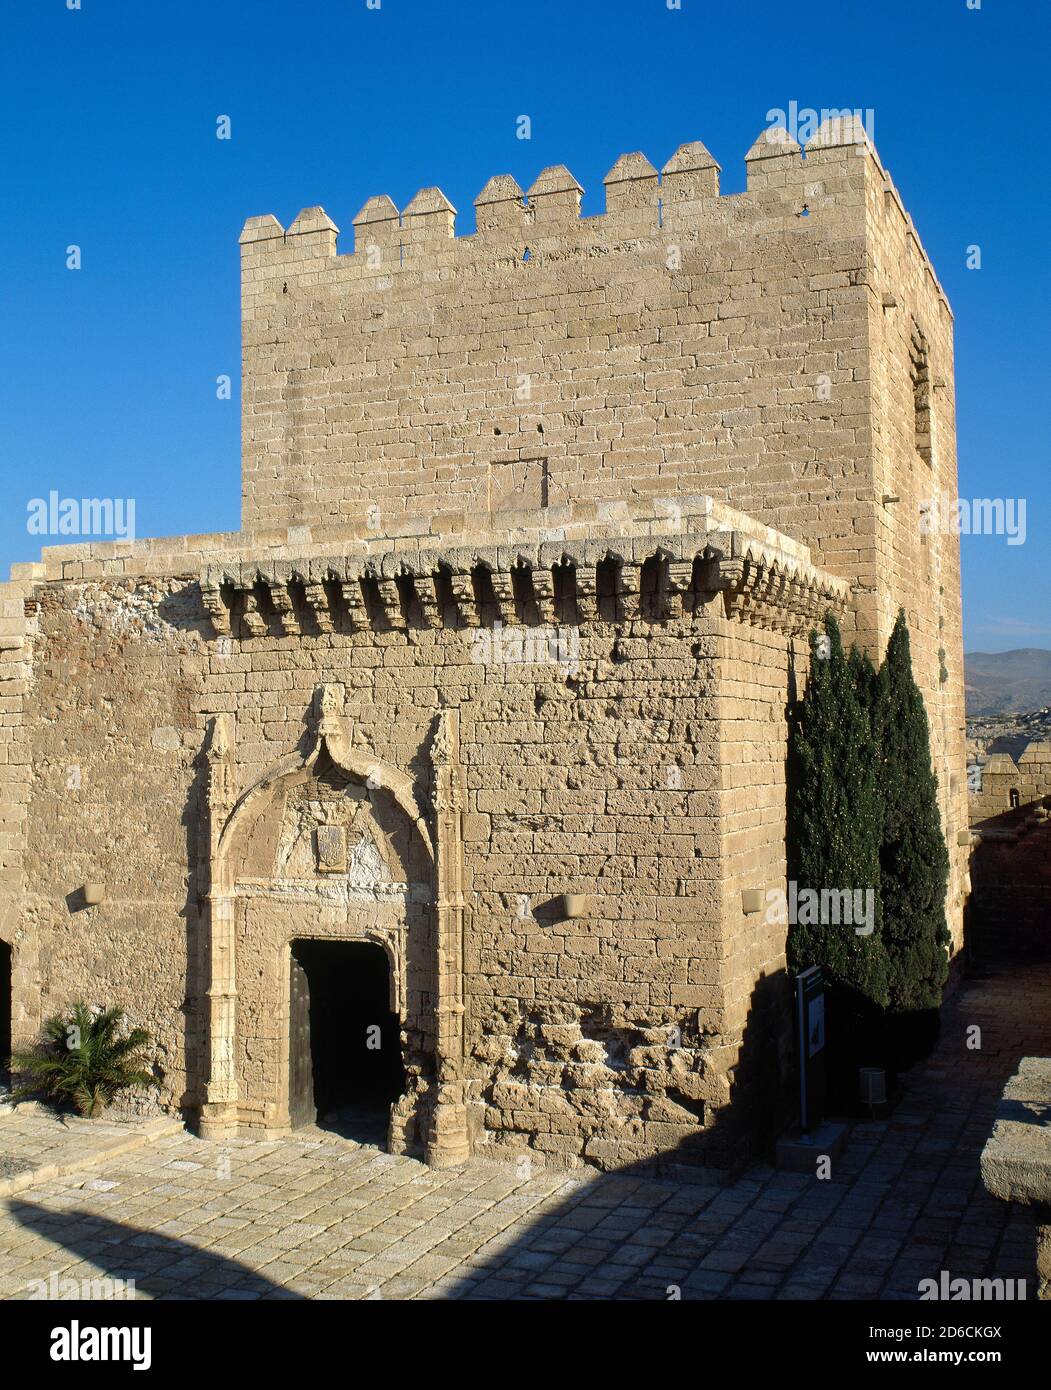 Spain, Andalusia, Almeria. The Alcazaba. Fortified complex whose construction was commissioned by the Caliph of Cordoba, Abd ar-Rahman III in 995 and finished by Hayran, taifa king of Almeria, in the 11th century. The complex was enlarged under calihp Al-Mansur and, later, under Al-Jairan. Gothic entrance to the Homage Tower.e Stock Photo